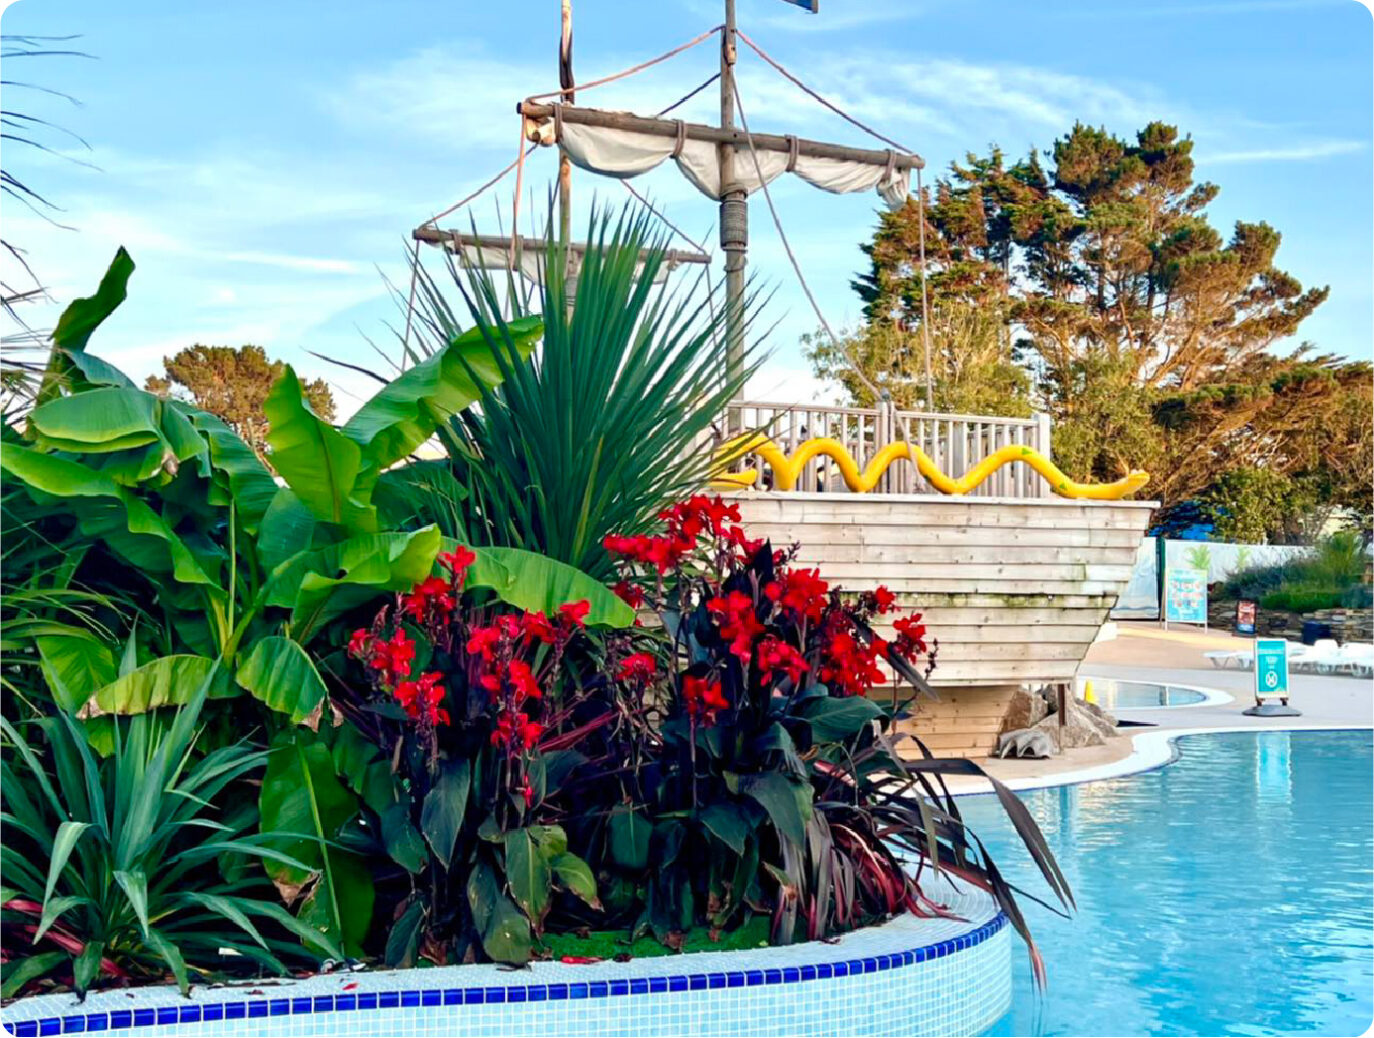 A vibrant outdoor swimming pool scene with lush green plants and red flowers in the foreground, and a whimsical small white boat with a sail structure by the poolside under a clear sky.